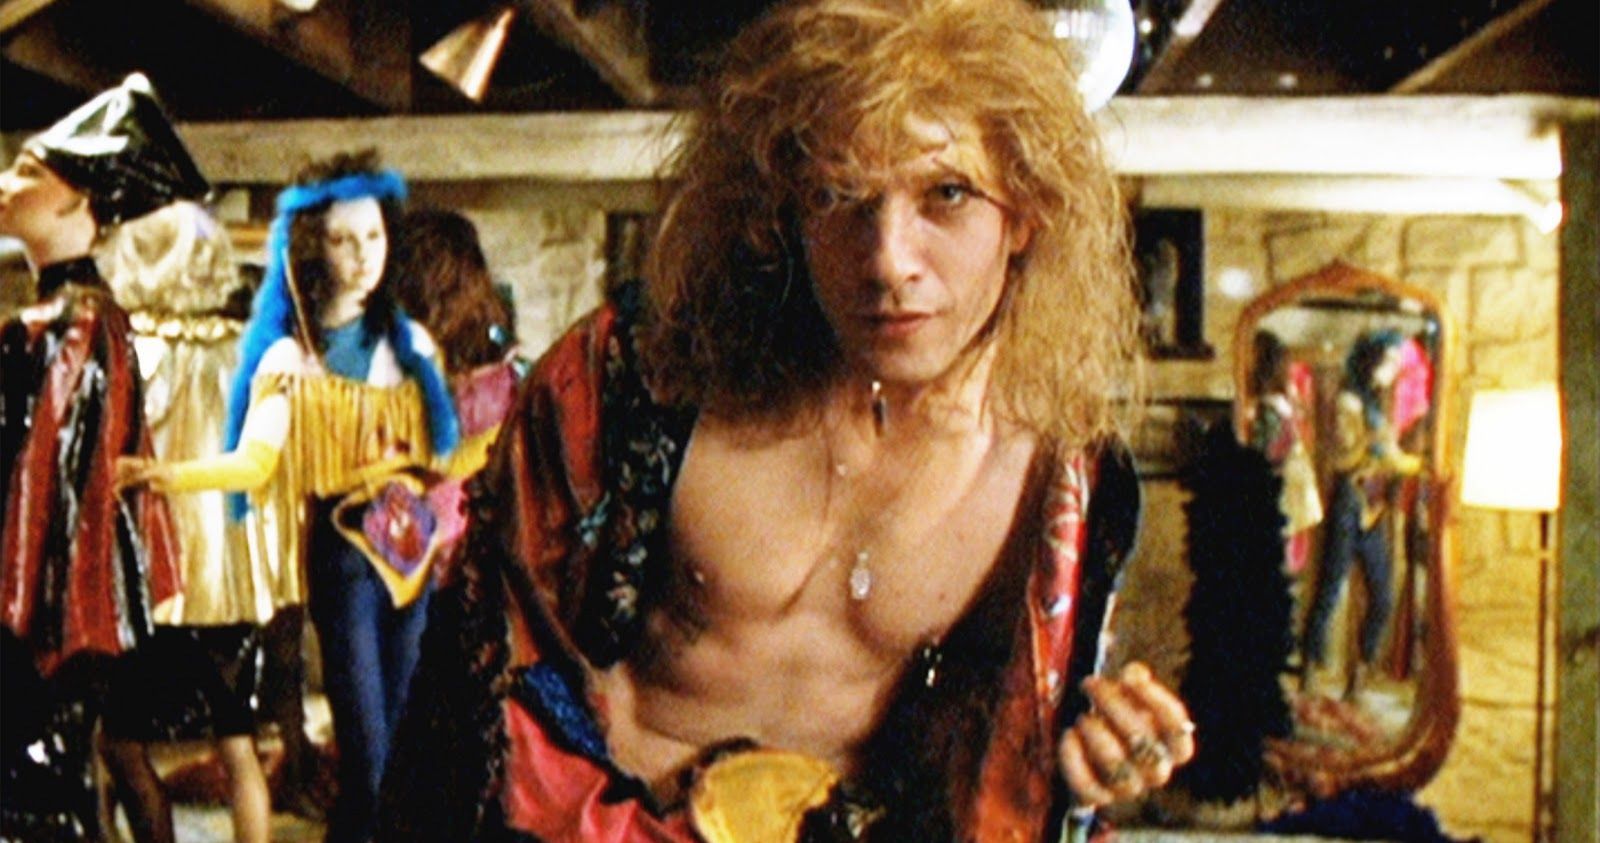 Buffalo Bill's House from The Silence of the Lambs Is Up for Sale Again